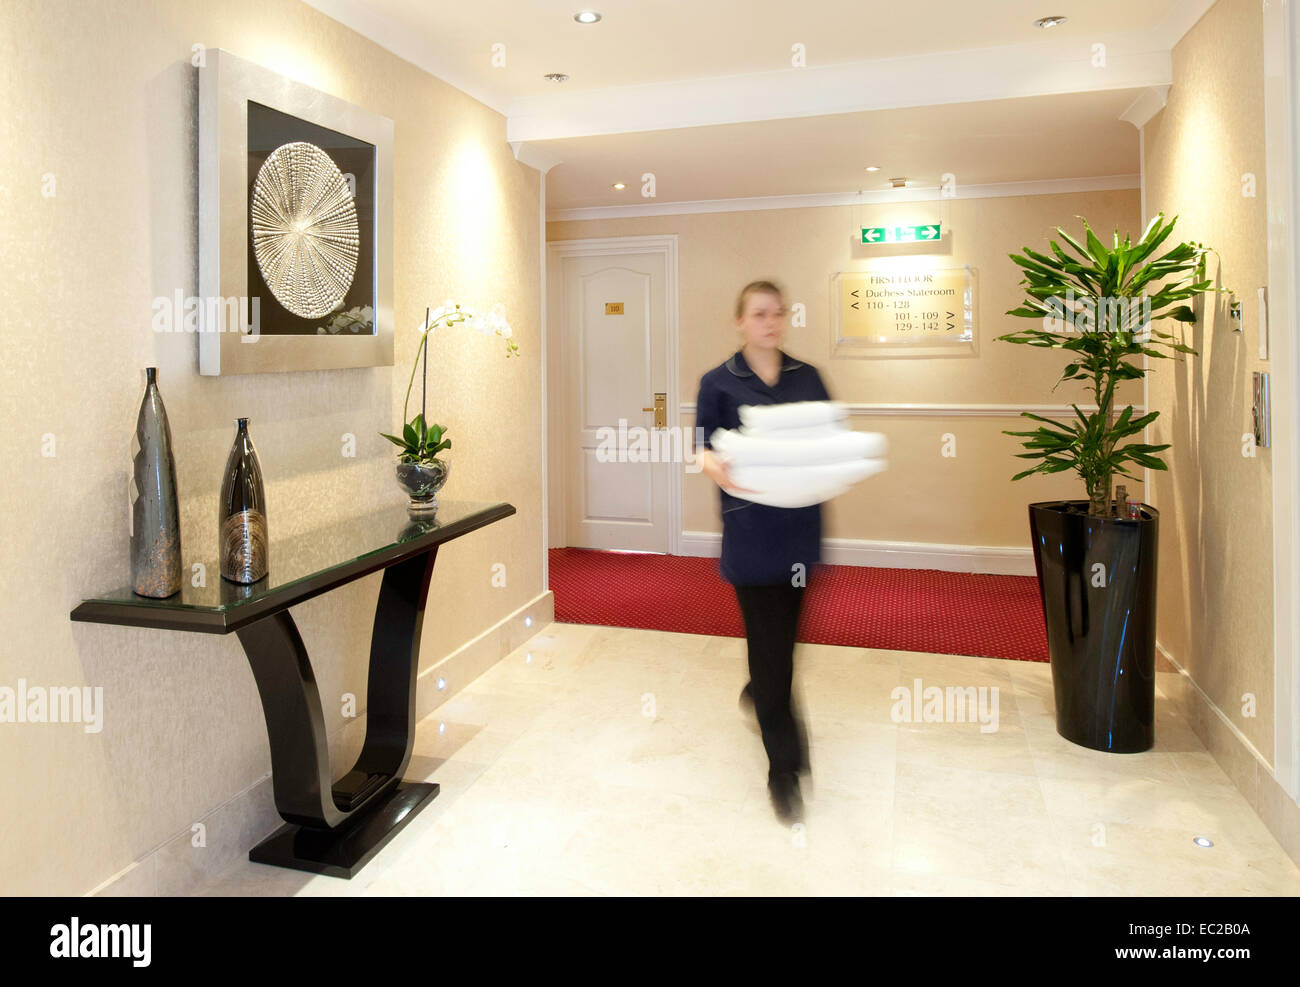 A hotel worker carrying towels in the lobby Stock Photo